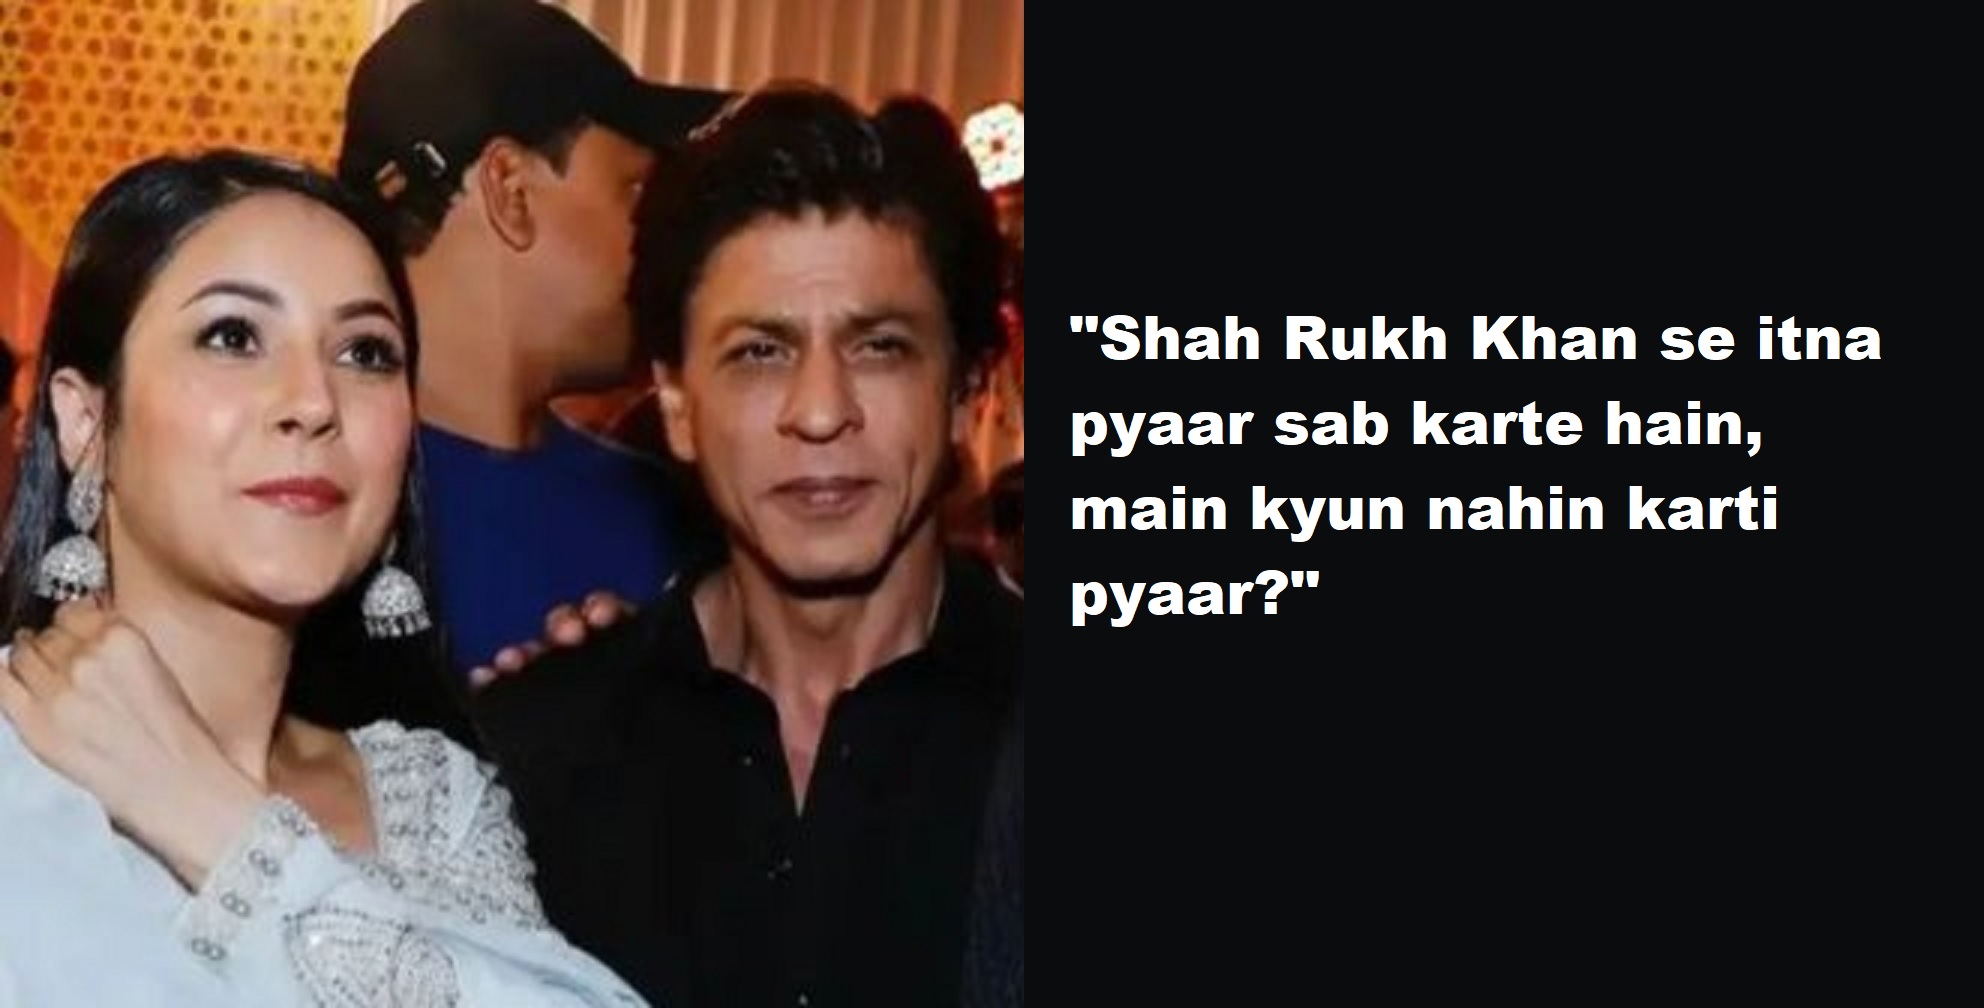 Shehnaaz Gill Says She Didn’t Understand People’s Love For Shah Rukh Khan Initially